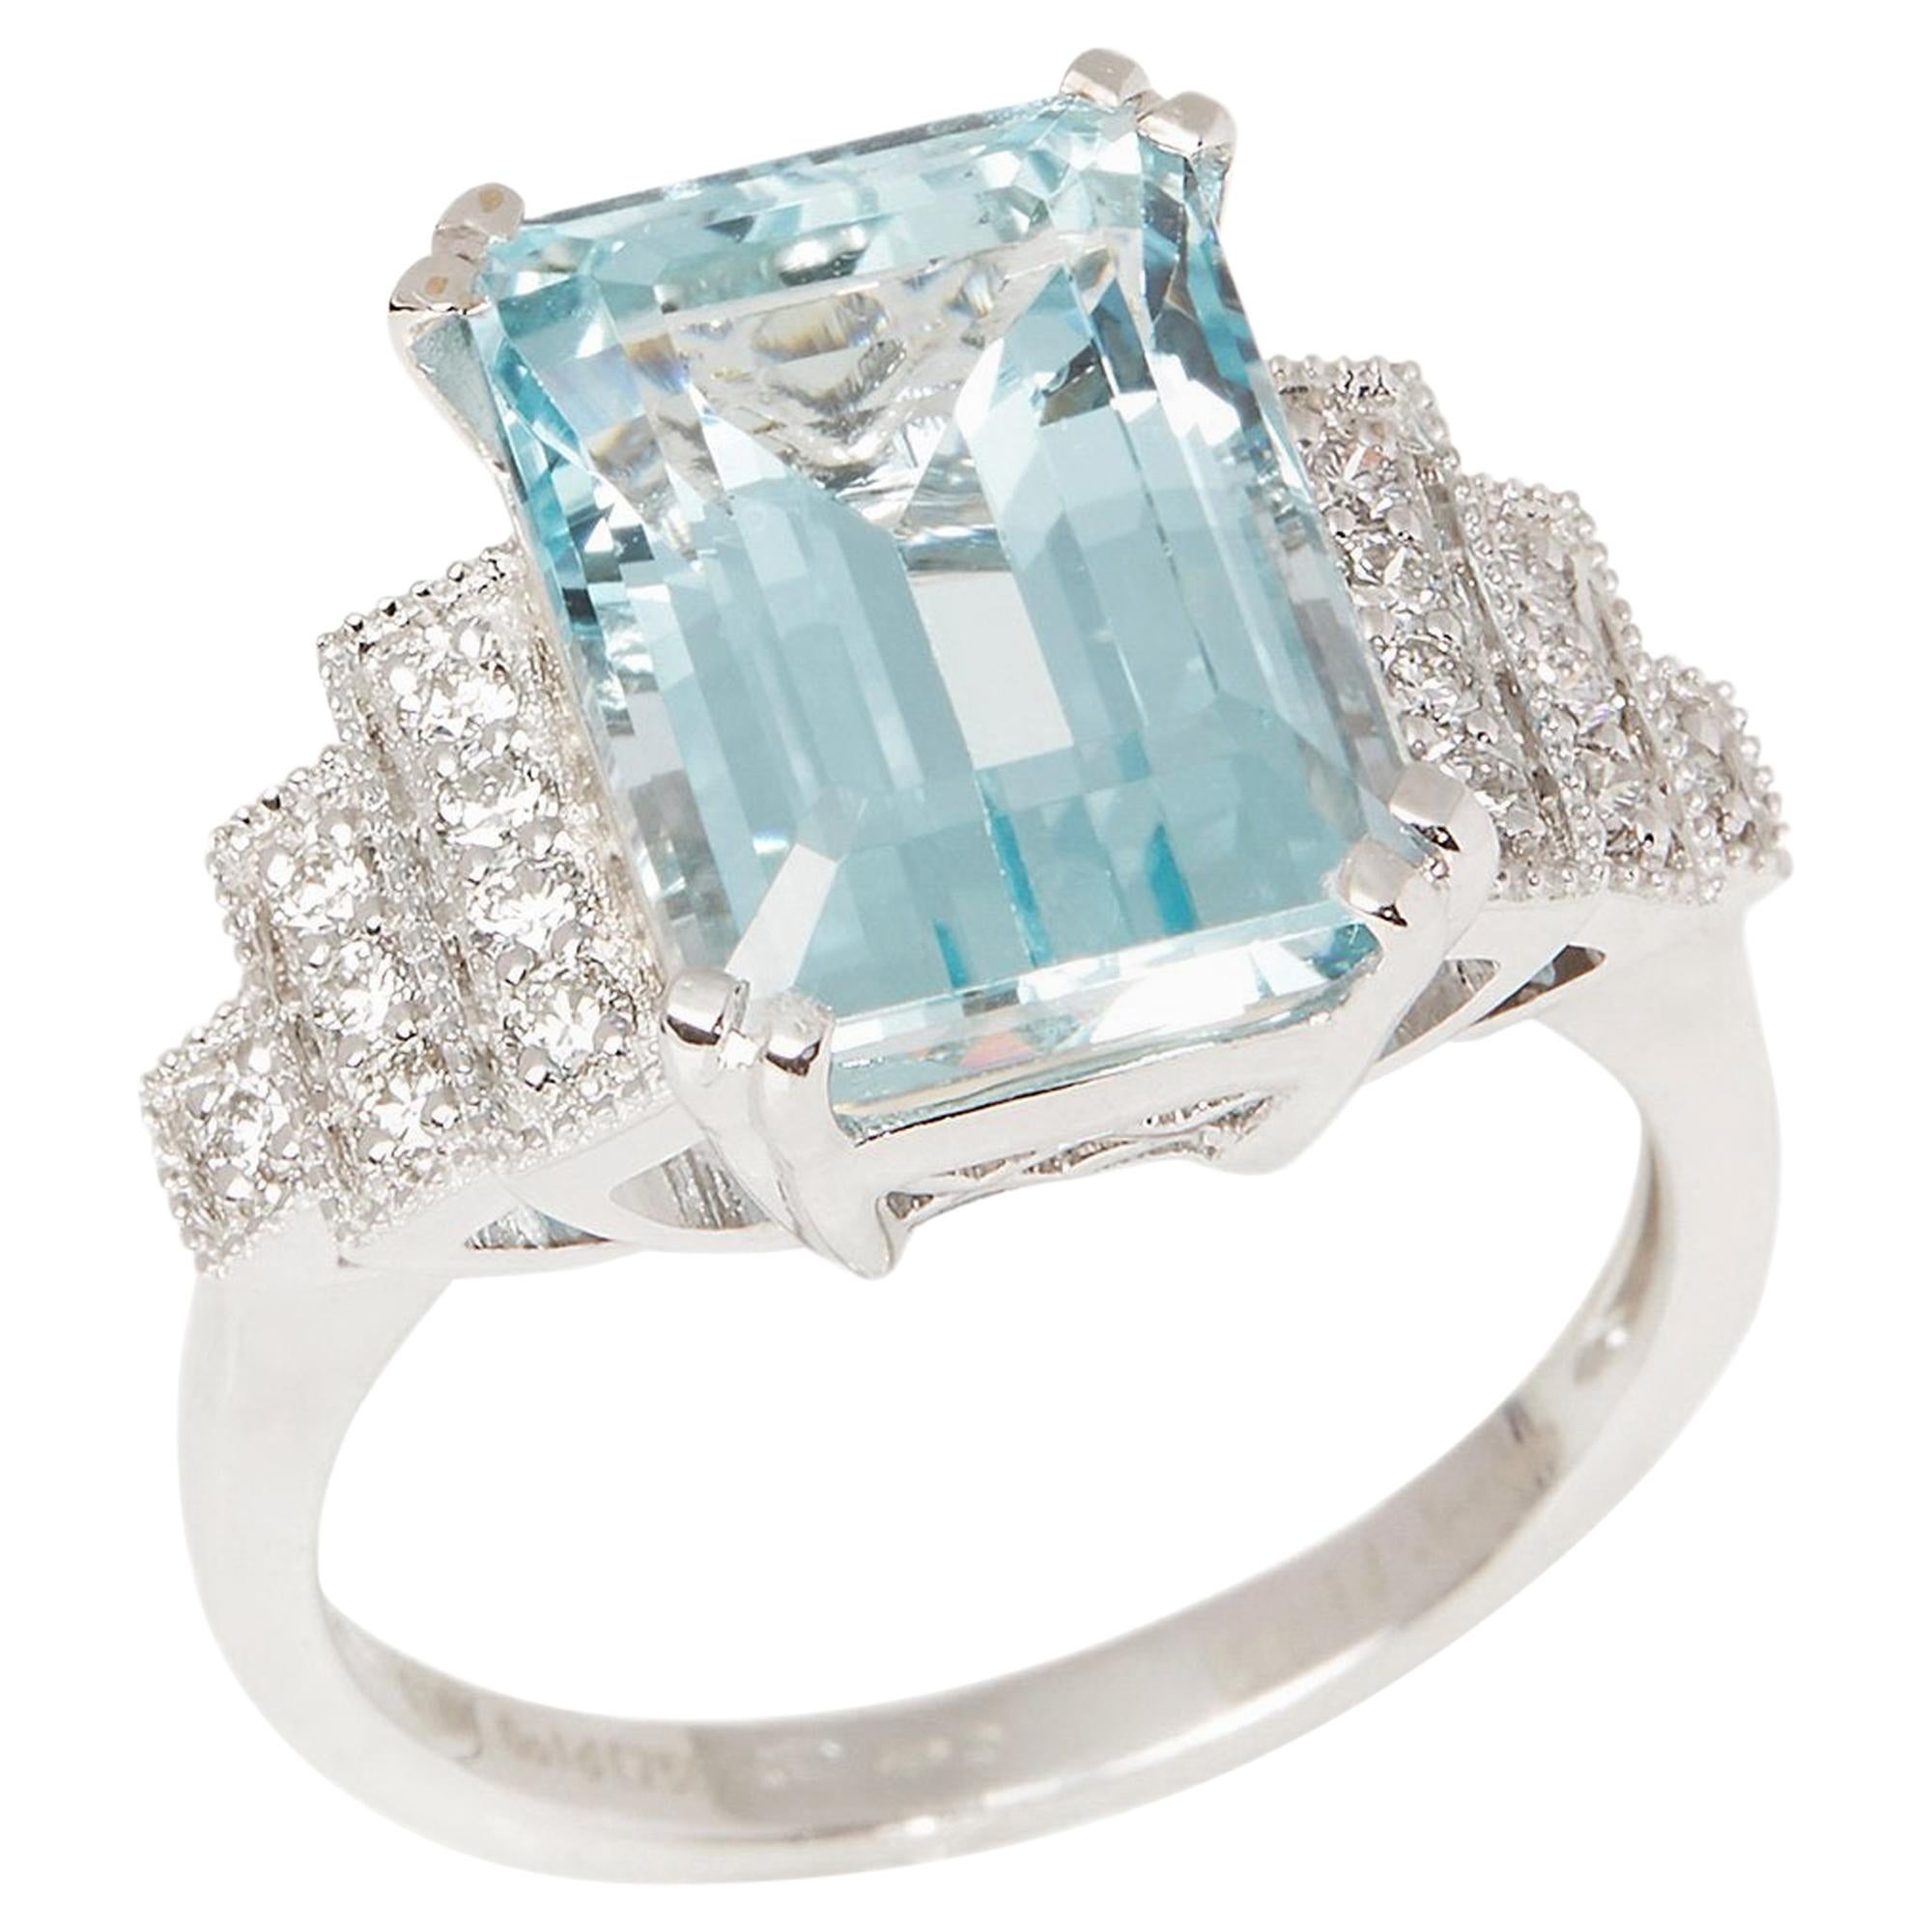 Certified 6.63ct Emerald cut Aquamarine and Diamond 18ct gold Ring For Sale